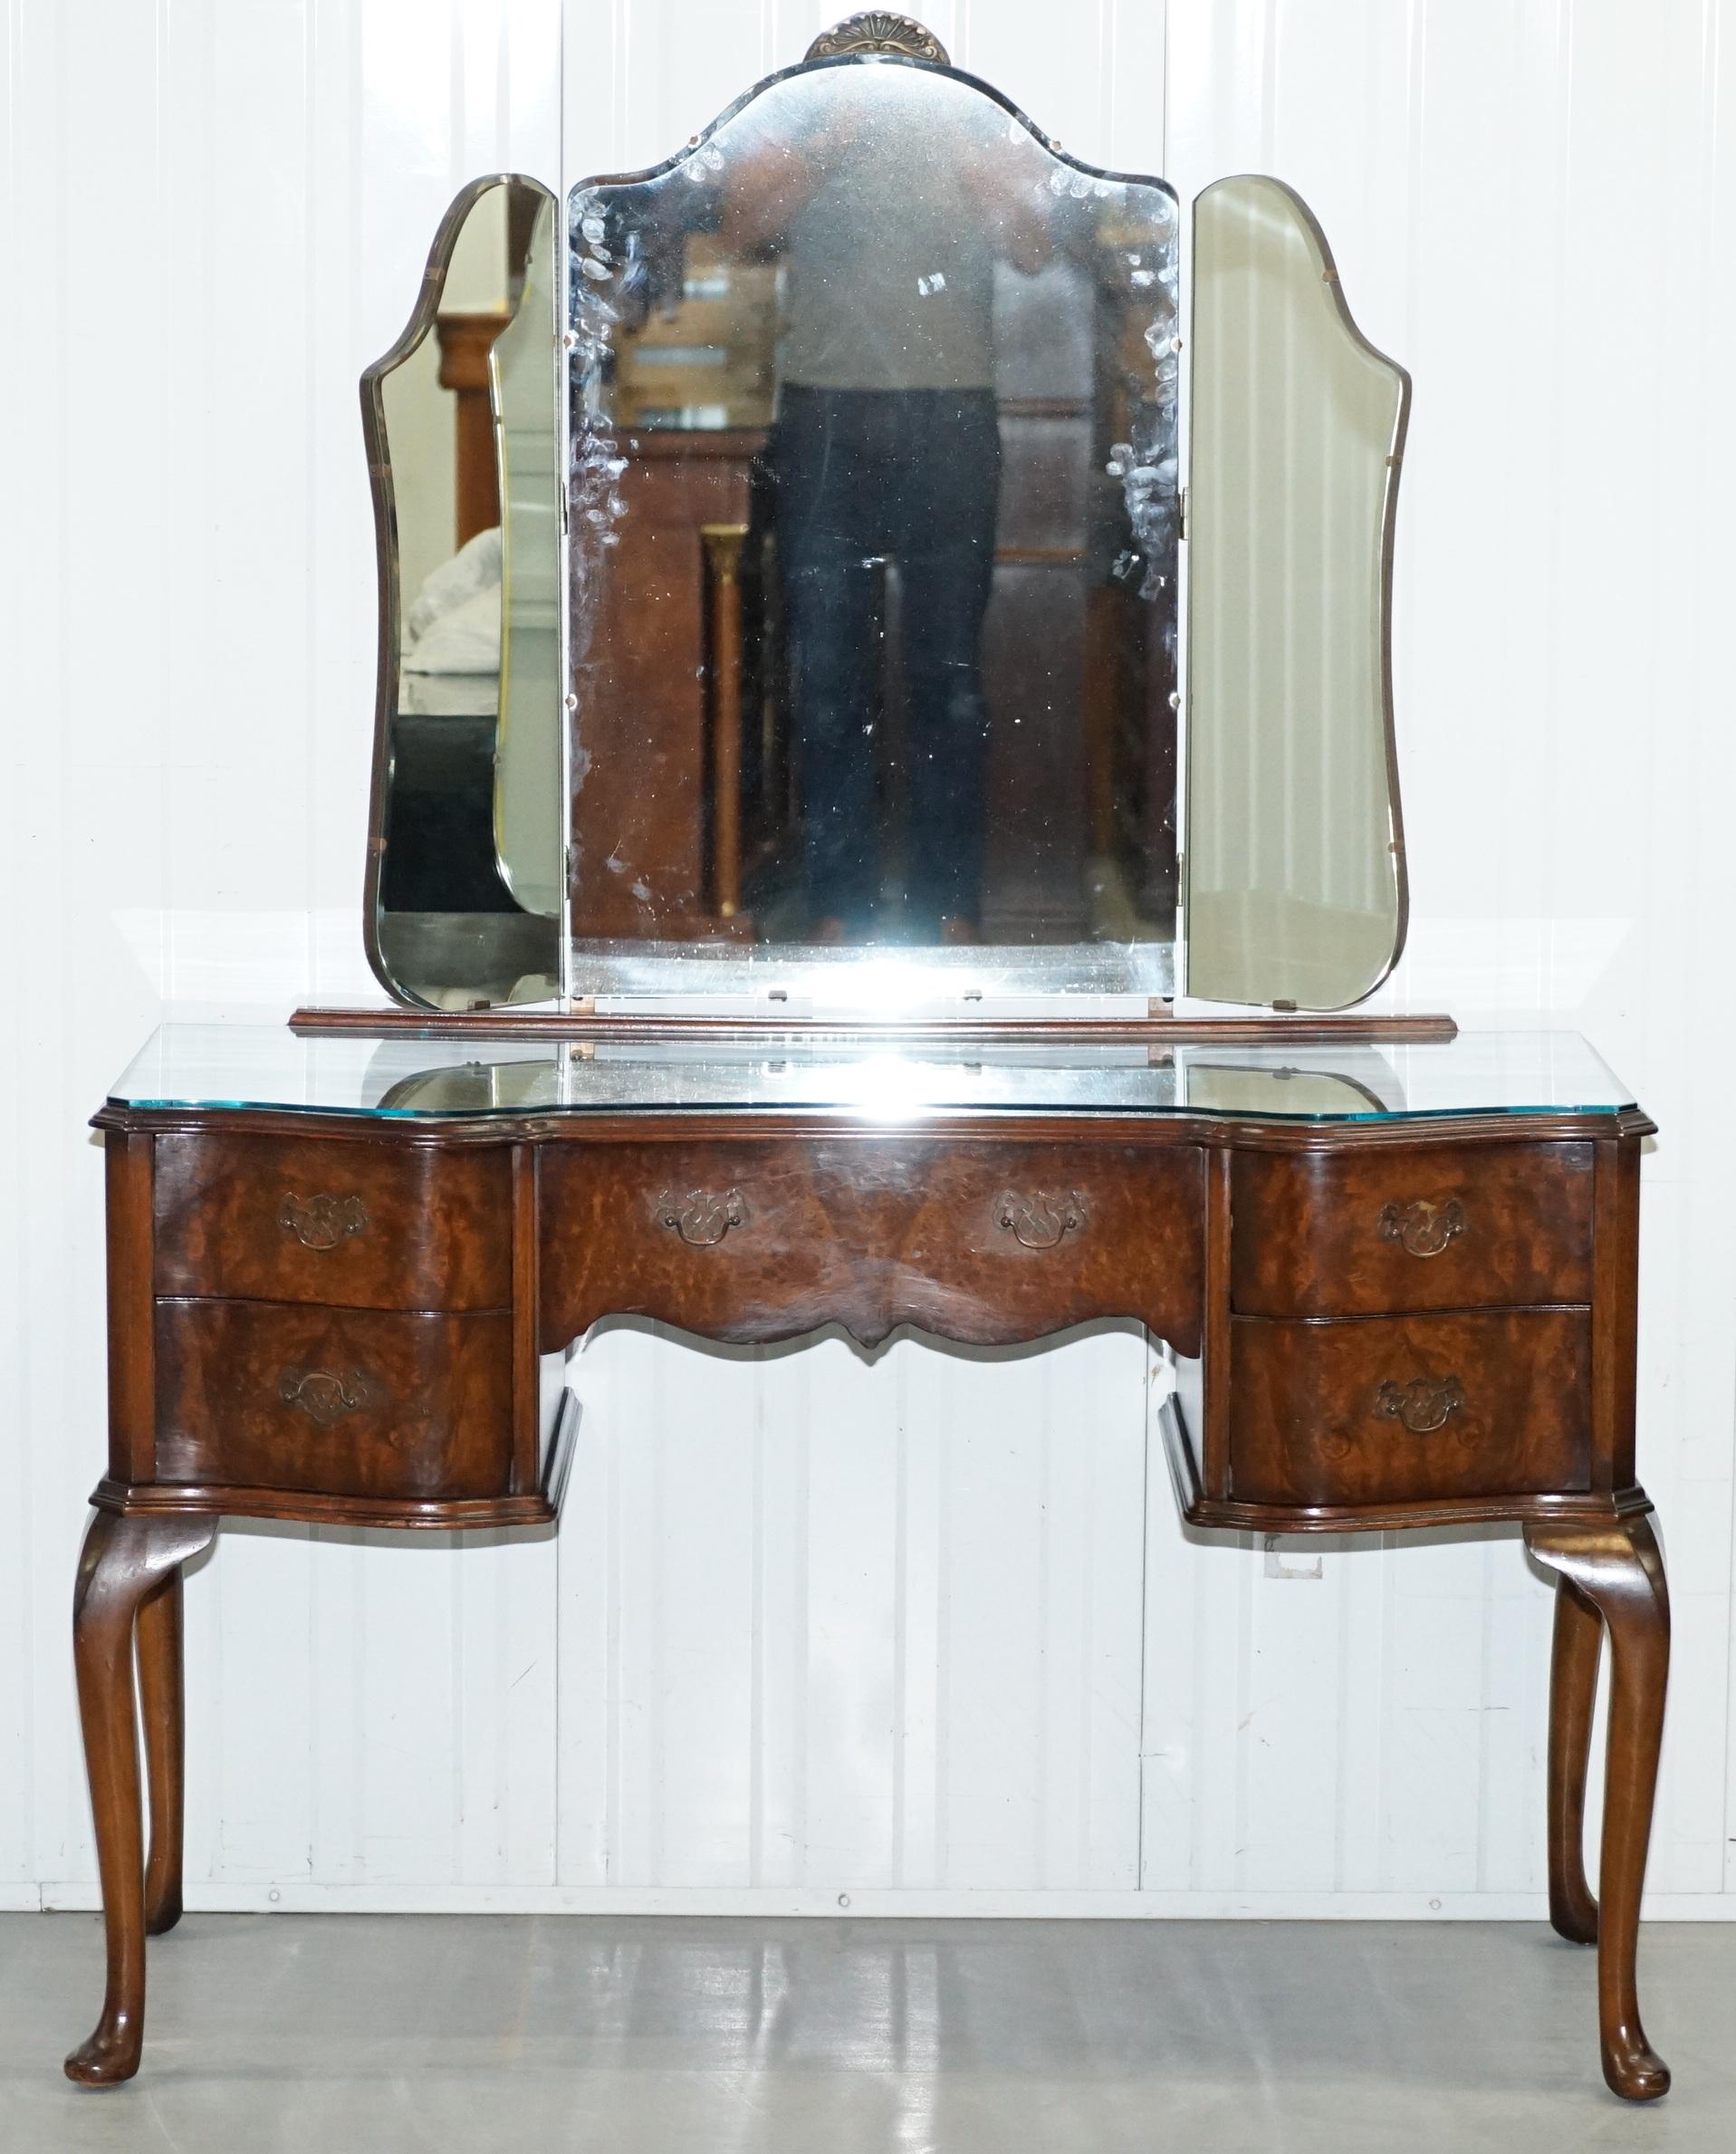 Wimbledon-Furniture is delighted to offer for sale this lovely handmade in England vintage 1930s Butilux quarter cut Walnut dressing table with tri fold mirrors 

Please note the delivery fee listed is just a guide, it covers within the M25 only,